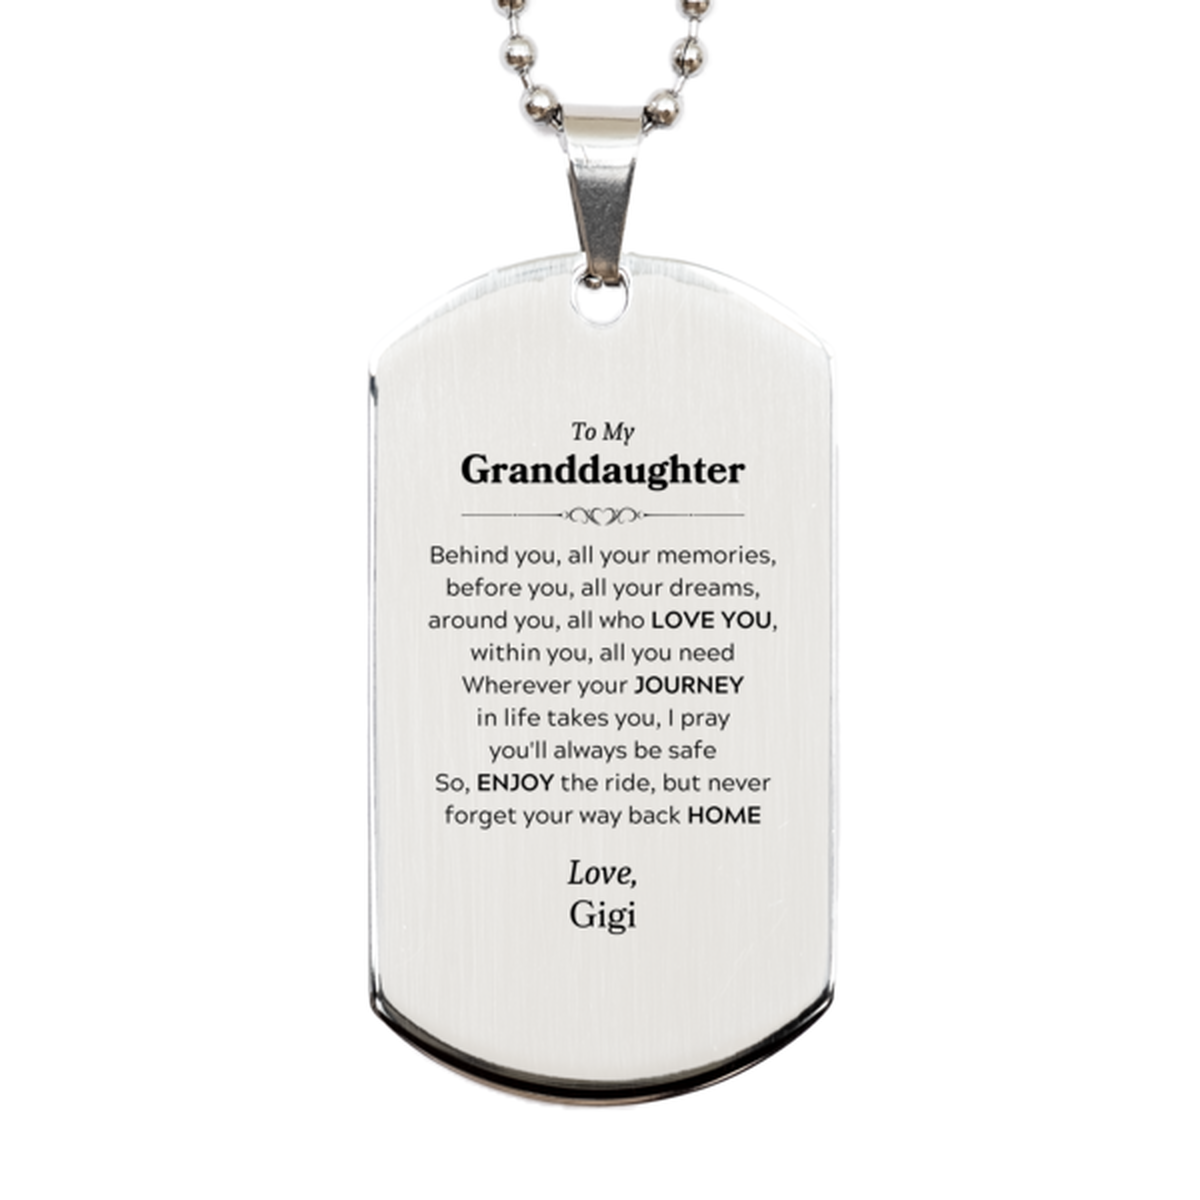 To My Granddaughter Graduation Gifts from Gigi, Granddaughter Silver Dog Tag Christmas Birthday Gifts for Granddaughter Behind you, all your memories, before you, all your dreams. Love, Gigi